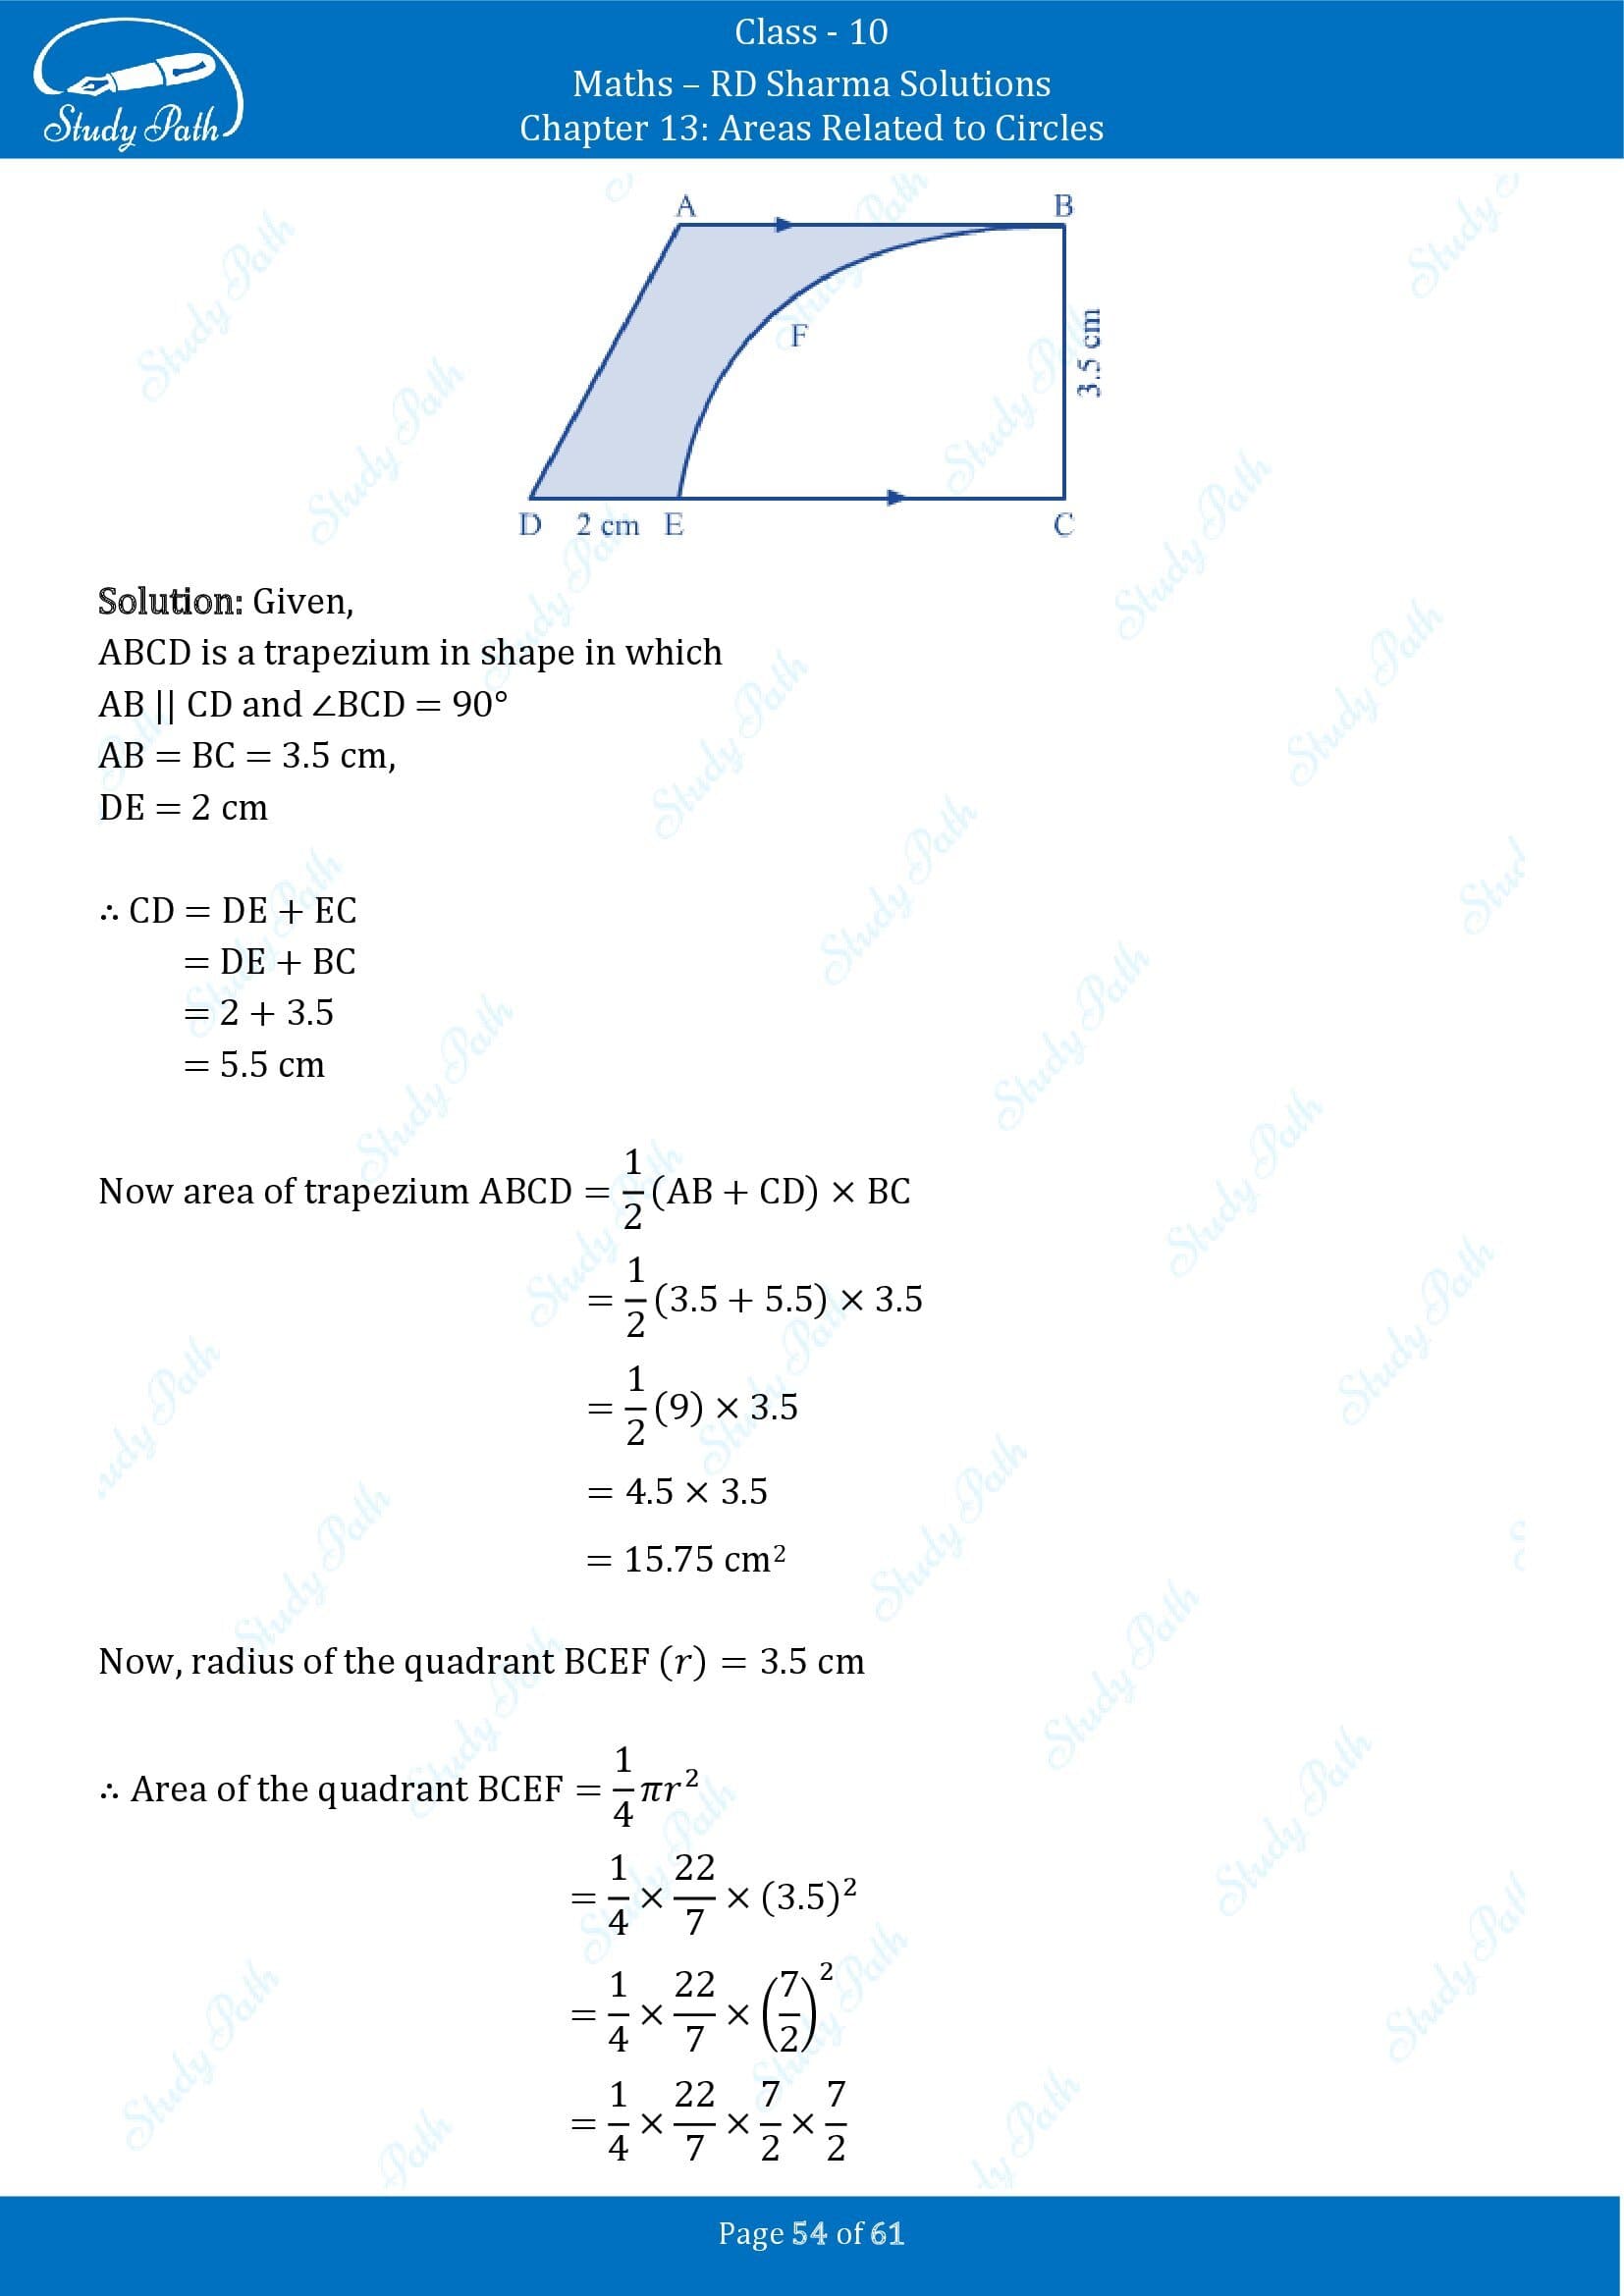 RD Sharma Solutions Class 10 Chapter 13 Areas Related to Circles Exercise 13.4 00054